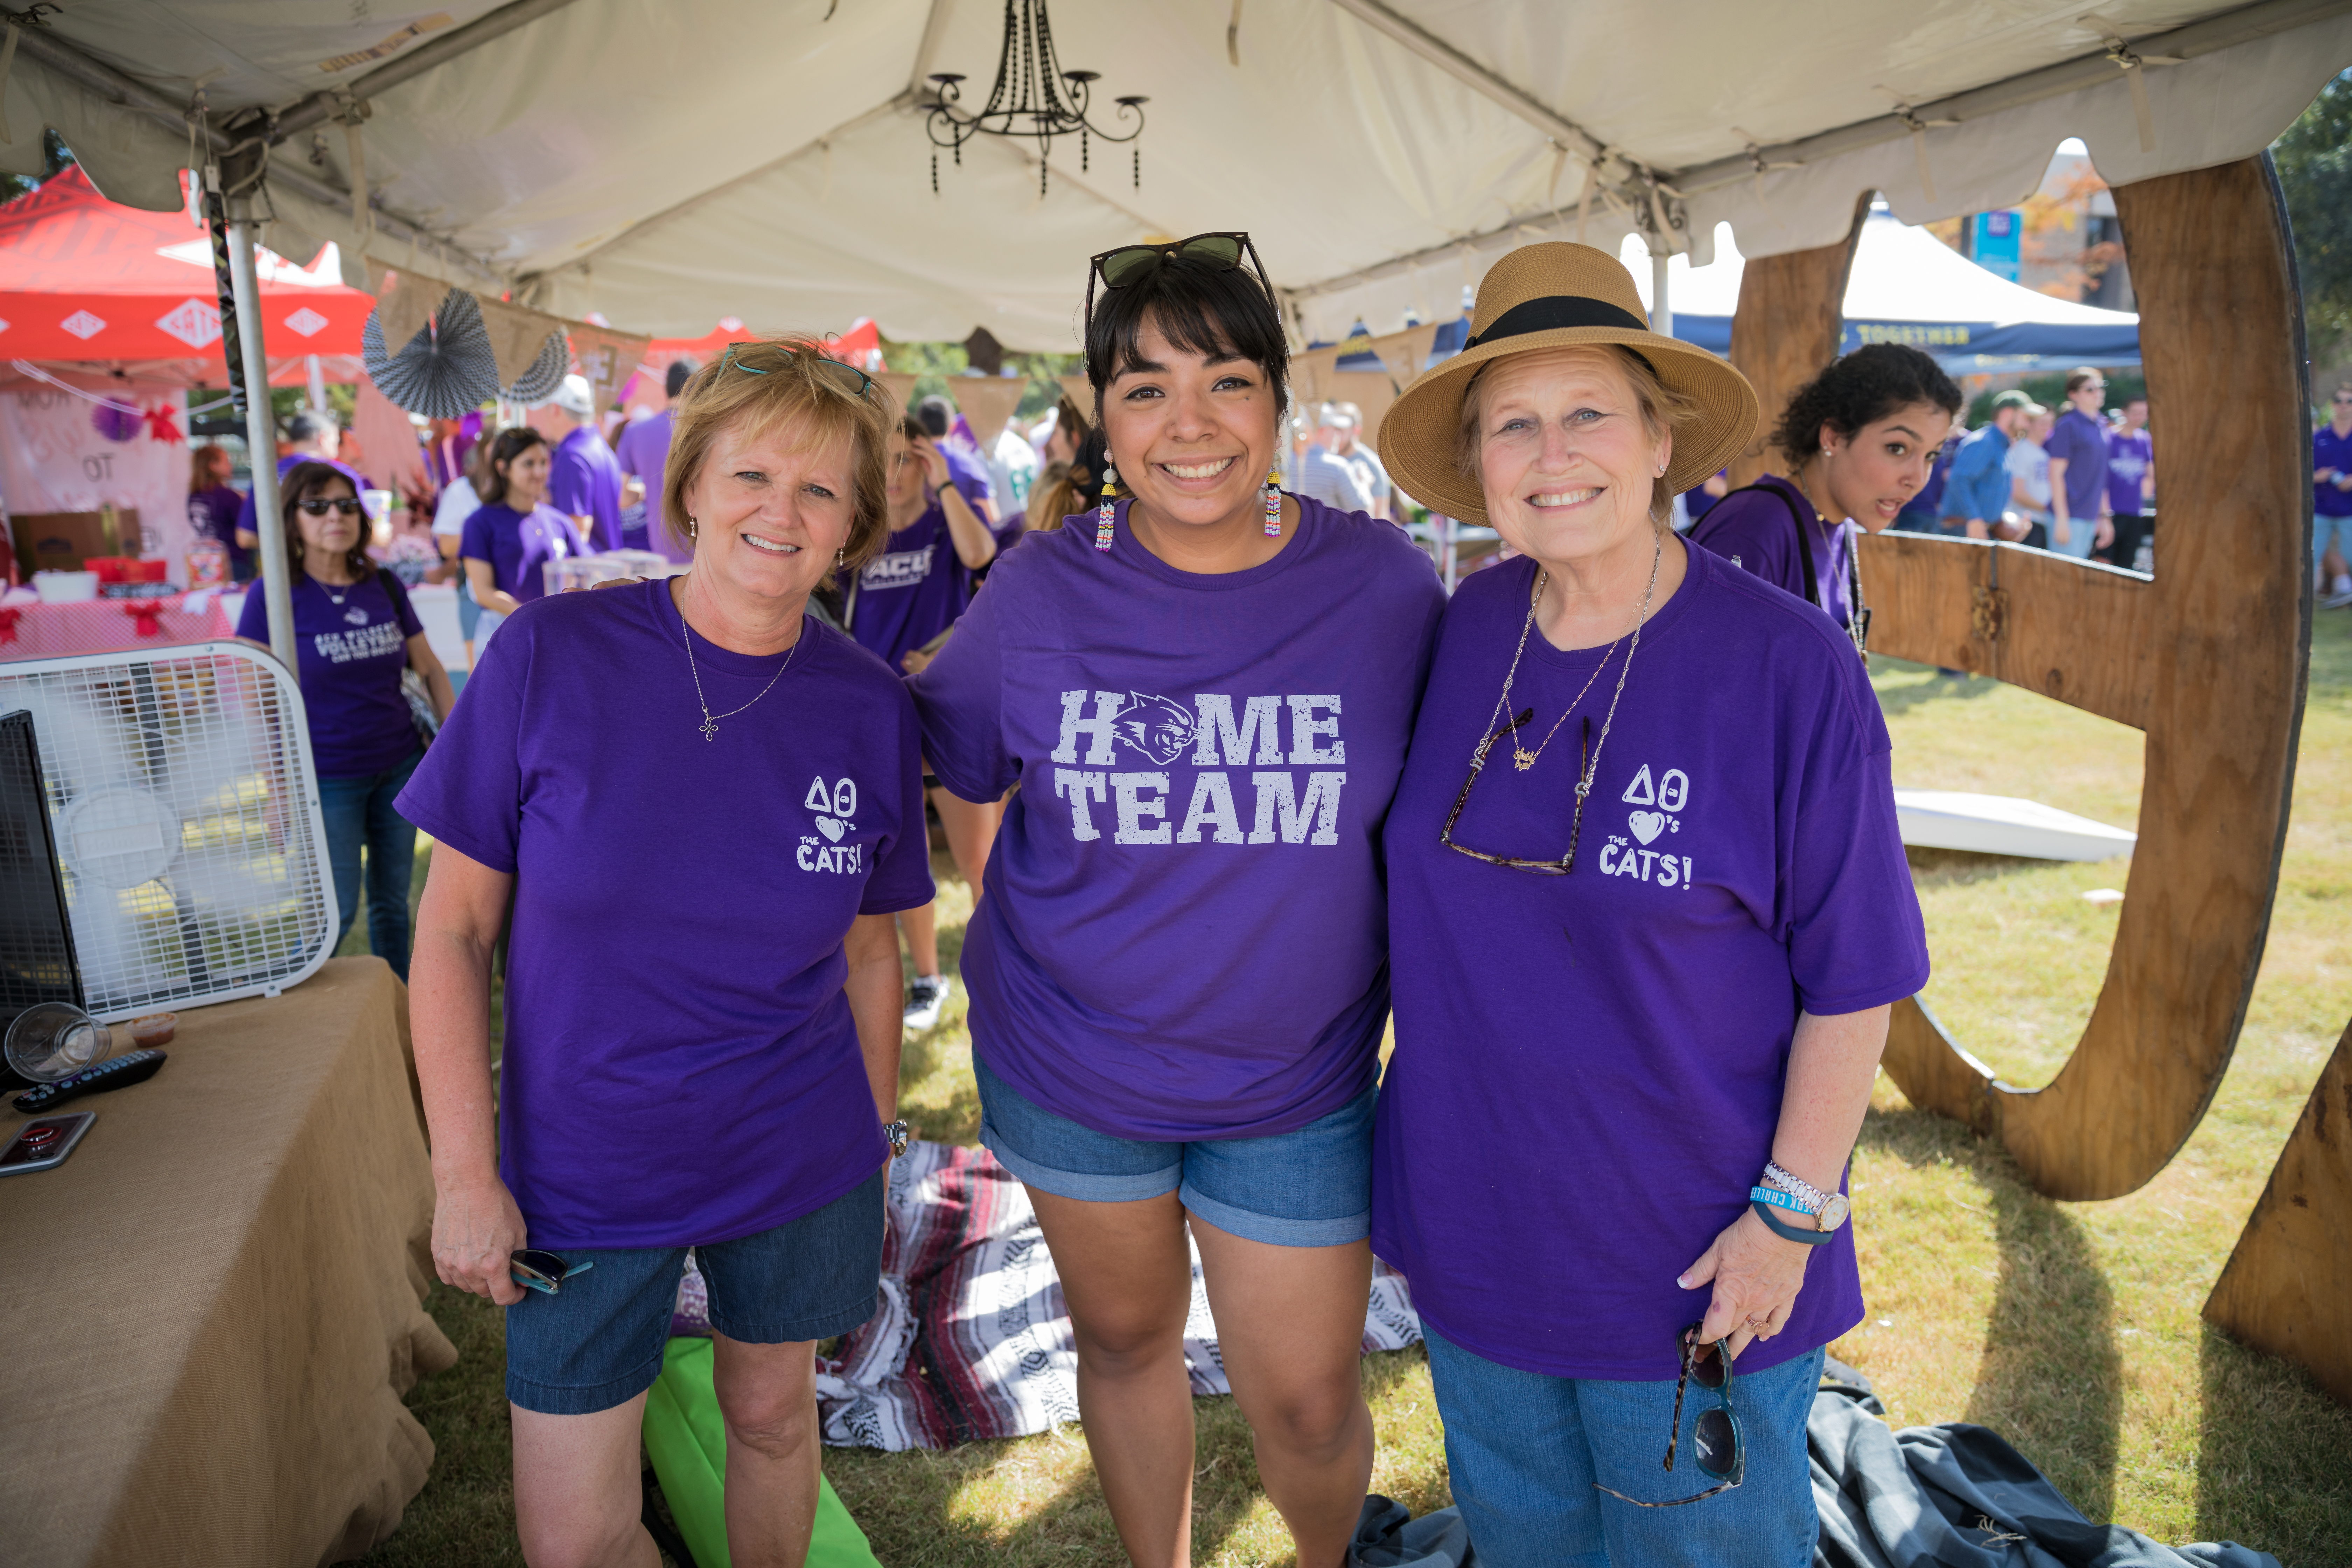 Delta Theta sponsors (from left) Beth (Neeley '78) Peables, Emerald (Cardenas '08) Cassidy and Debbie Haag ('73)are ready to welcome guests to the club's tent.